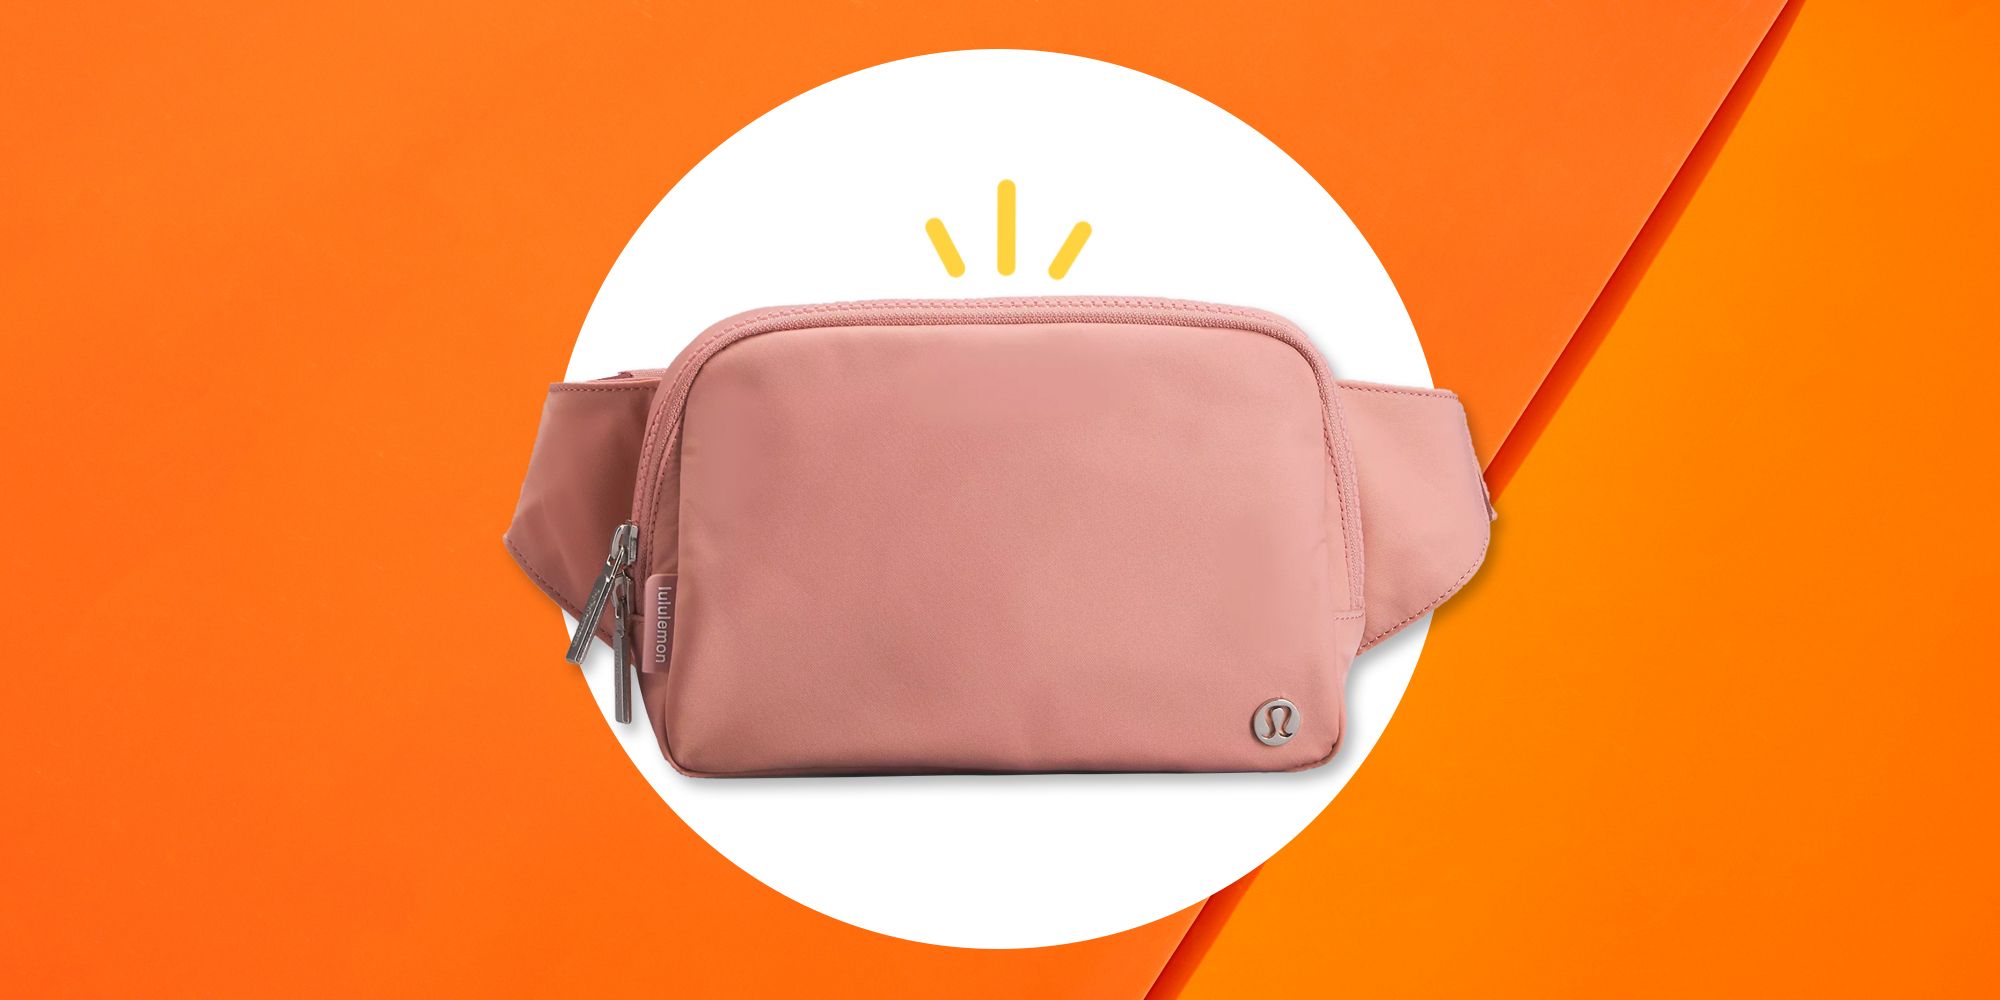 The lululemon Everywhere Belt Bag is restocked with new colors